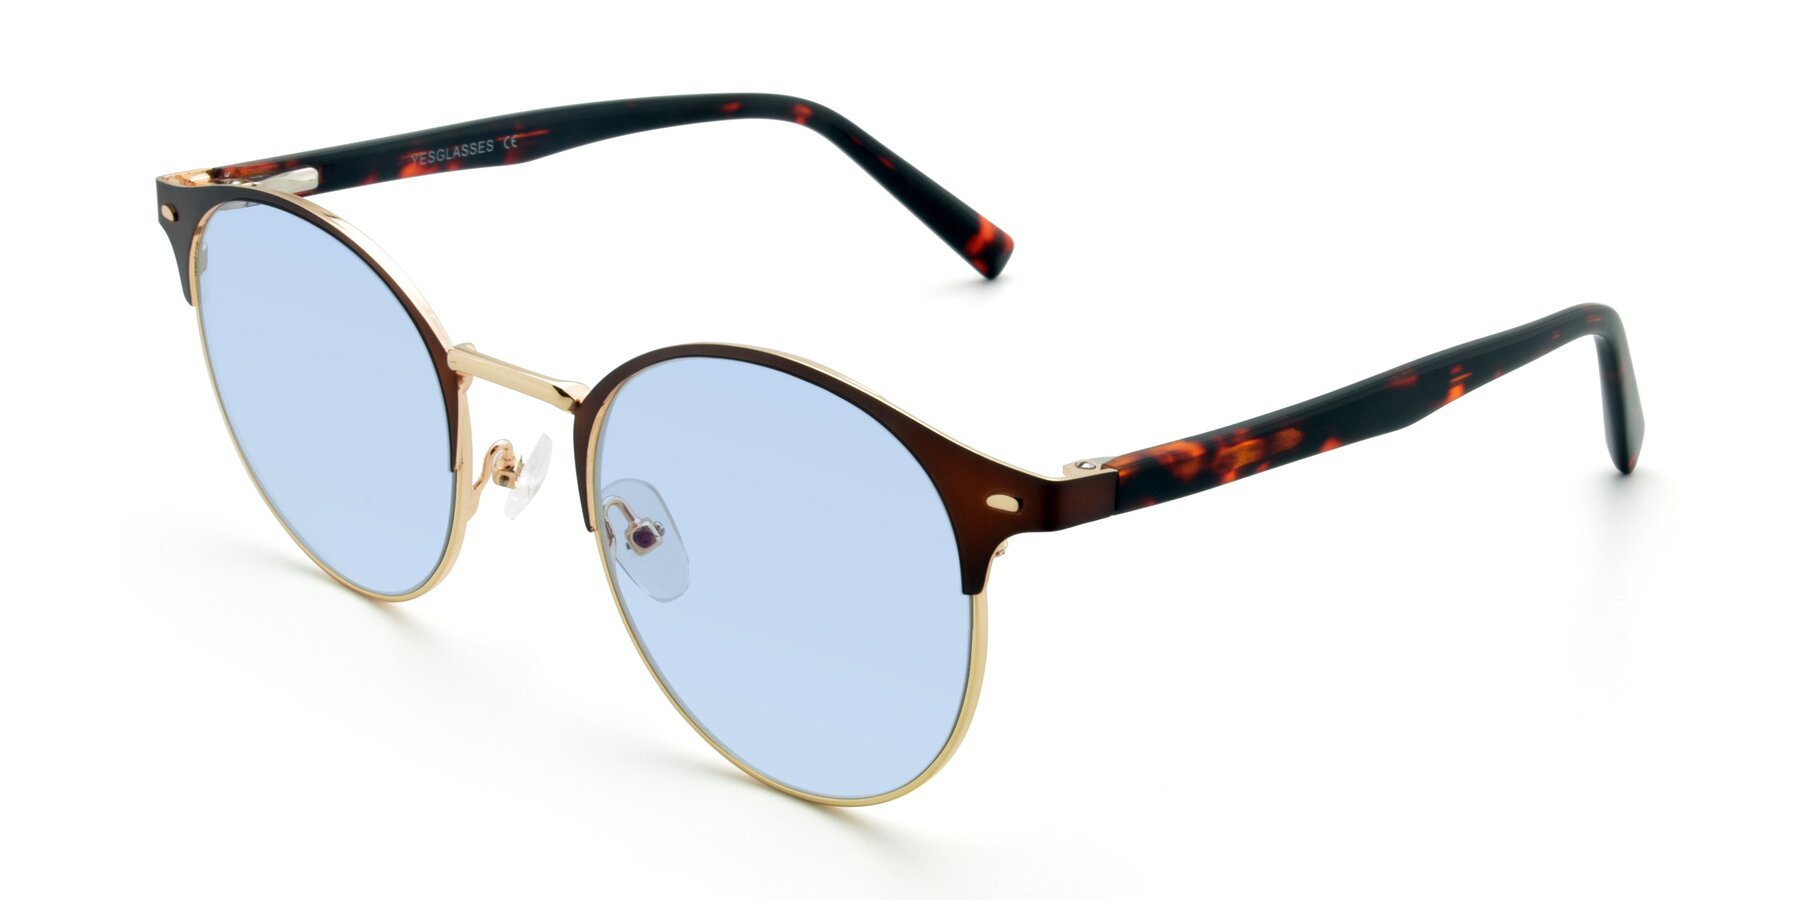 Angle of 9099 in Brown-Gold with Light Blue Tinted Lenses